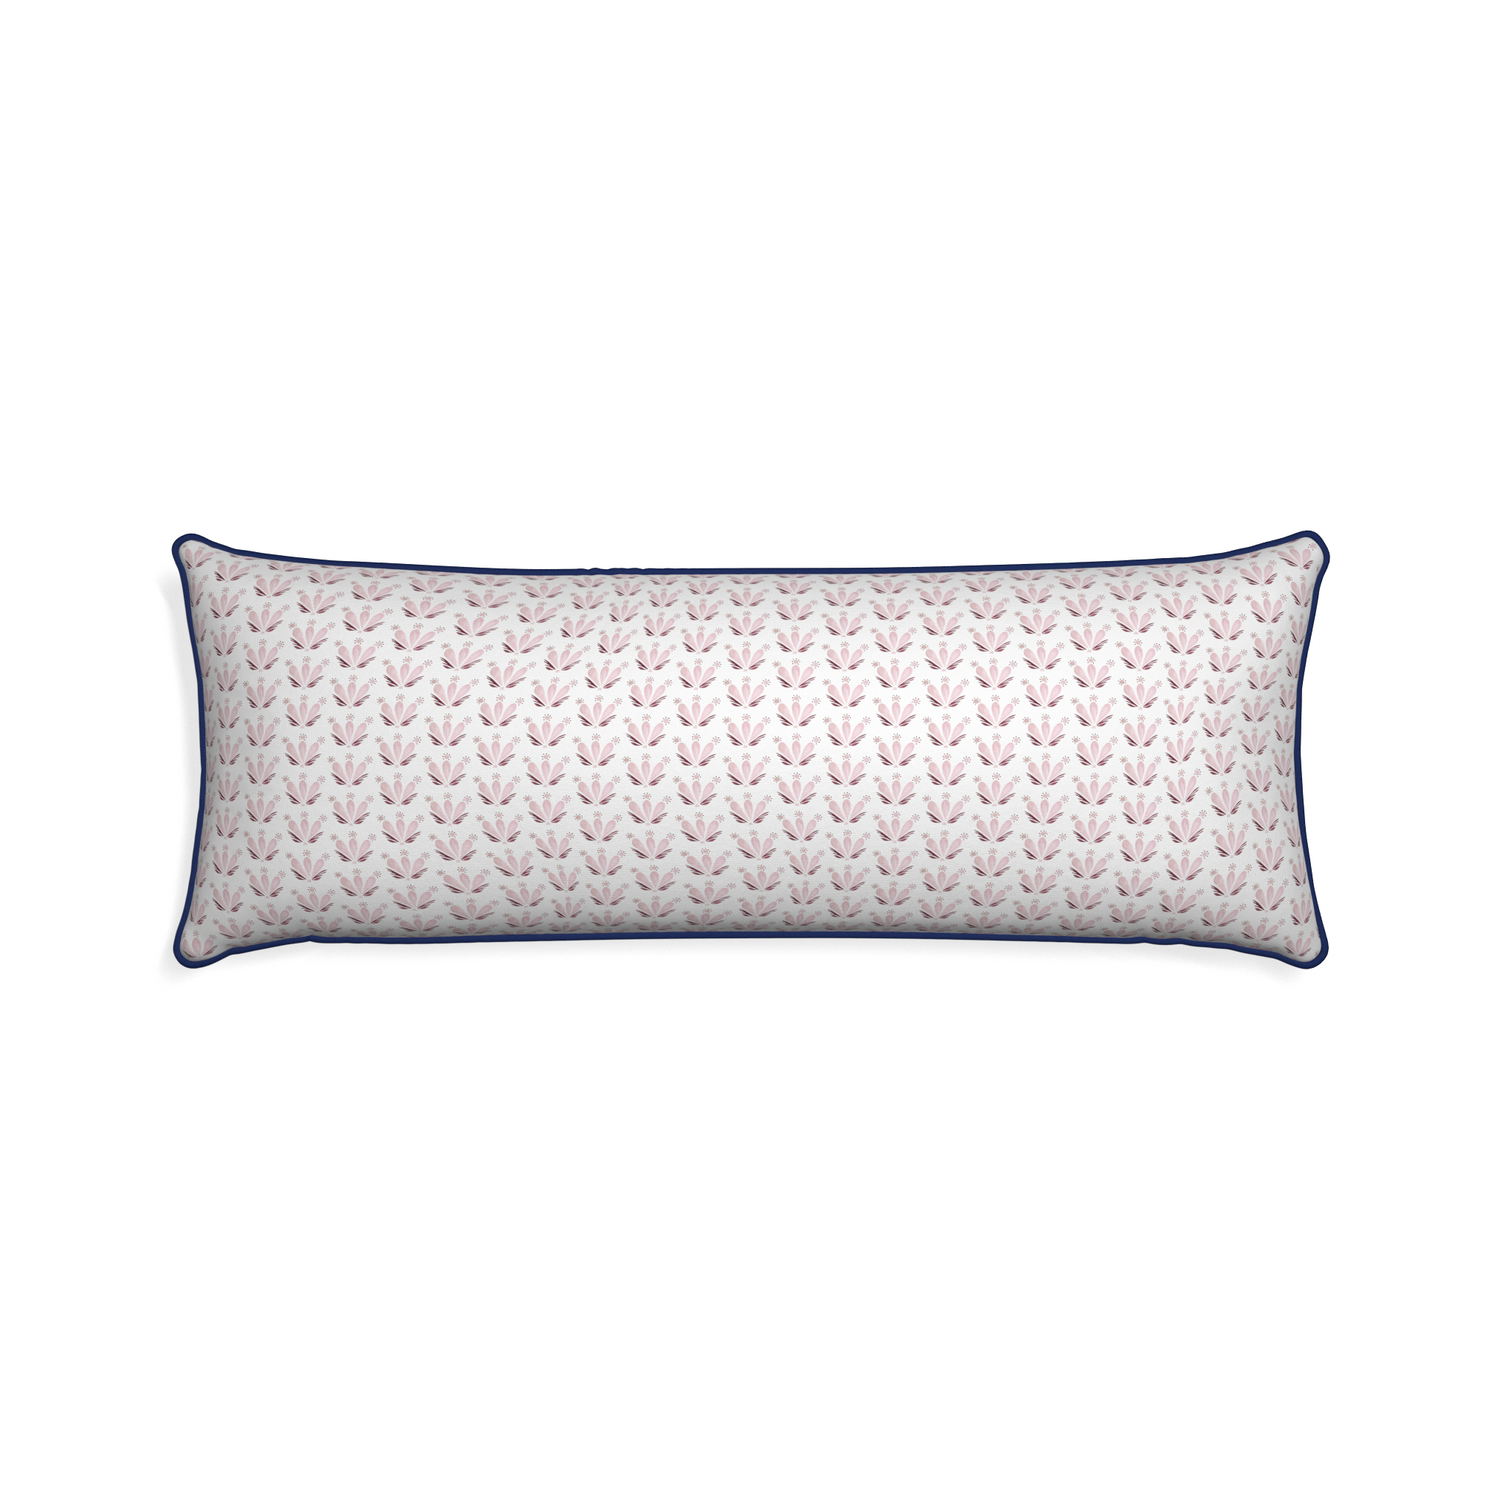 Xl-lumbar serena pink custom pillow with midnight piping on white background